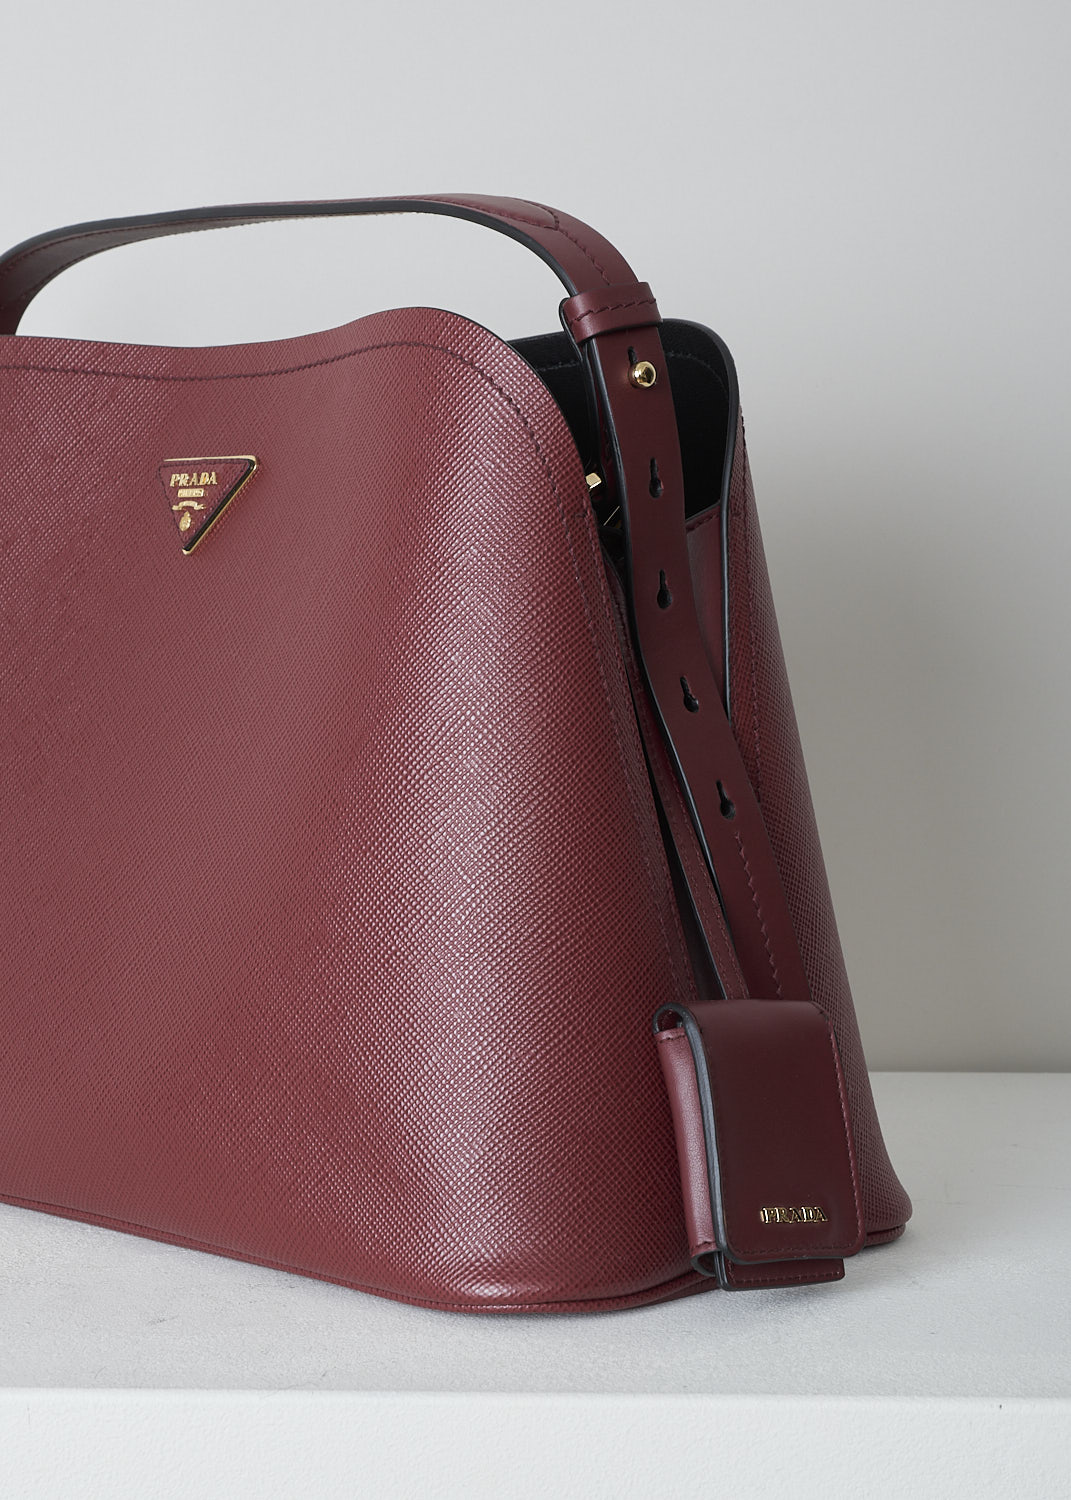 PRADA, MEDIUM MATINÃ‰E SHOULDER BAG IN CHERRY RED, SAFFIANO_CUIR_C_1BA249_CERISE_NERO, Red, Detail, This cherry red MatinÃ©e shoulder bag is made with Saffiano leather. Both the leather handle and shoulder strap are adjustable and detachable. The bag has gold-tone metal hardware with the brand's triangle logo plaque on the front. The open top has a magnetic snap closure in the middle. The black interior has a centre zip pocket that divides the main compartment into two spacious sides. The bag has a removable leather keychain.  
 
